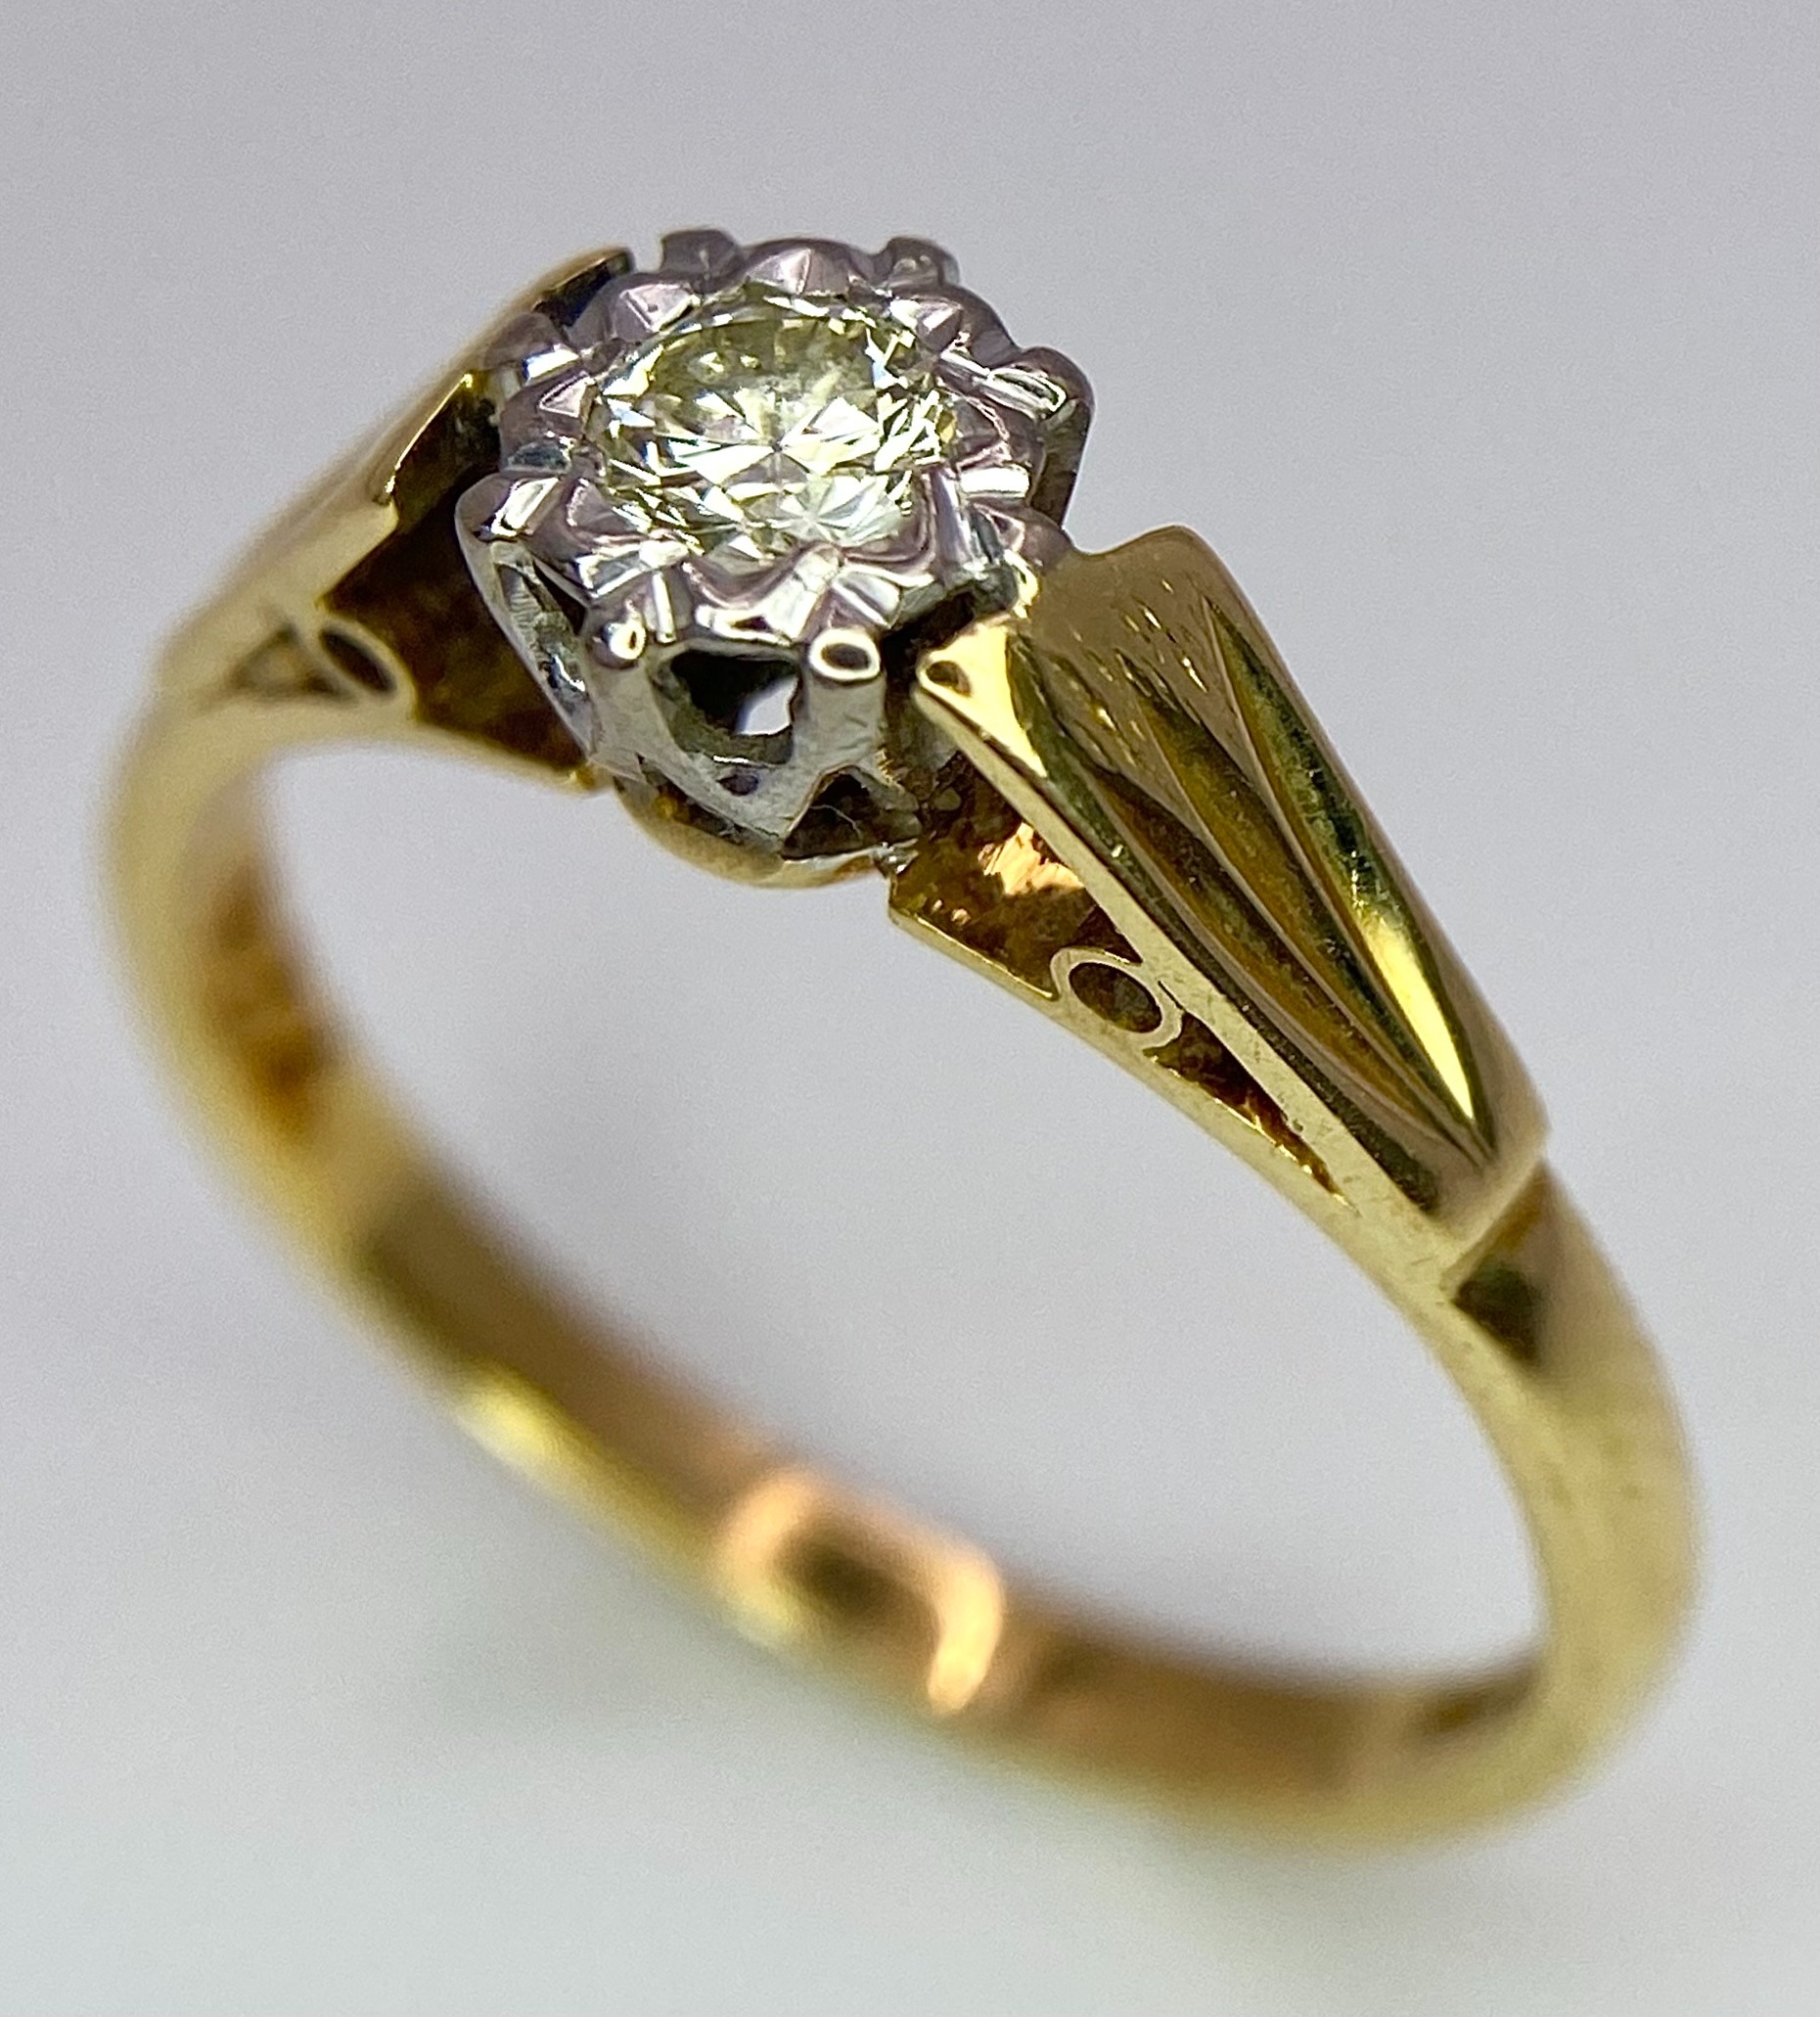 A VINTAGE 18K YELLOW GOLD DIAMOND SOLITAIRE RING. 0.15CT. 2.6G. SIZE L 1/2. - Image 2 of 6